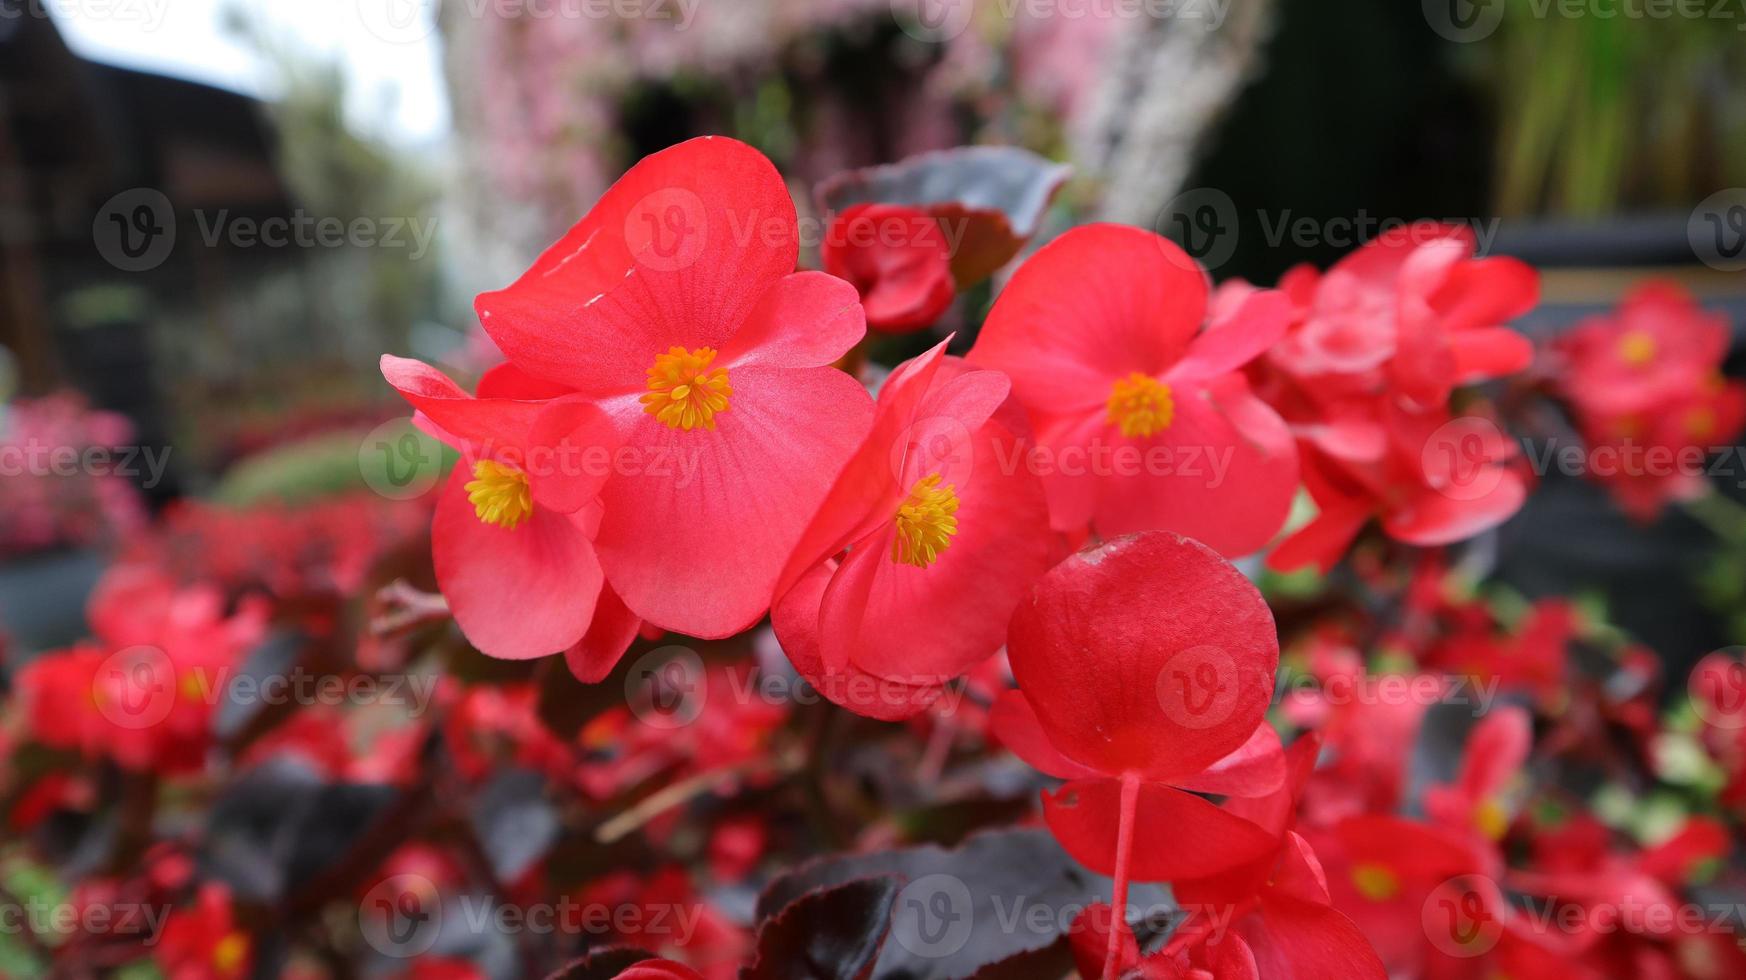 Close up photo of Red wax begonia flower blooming in a garden.